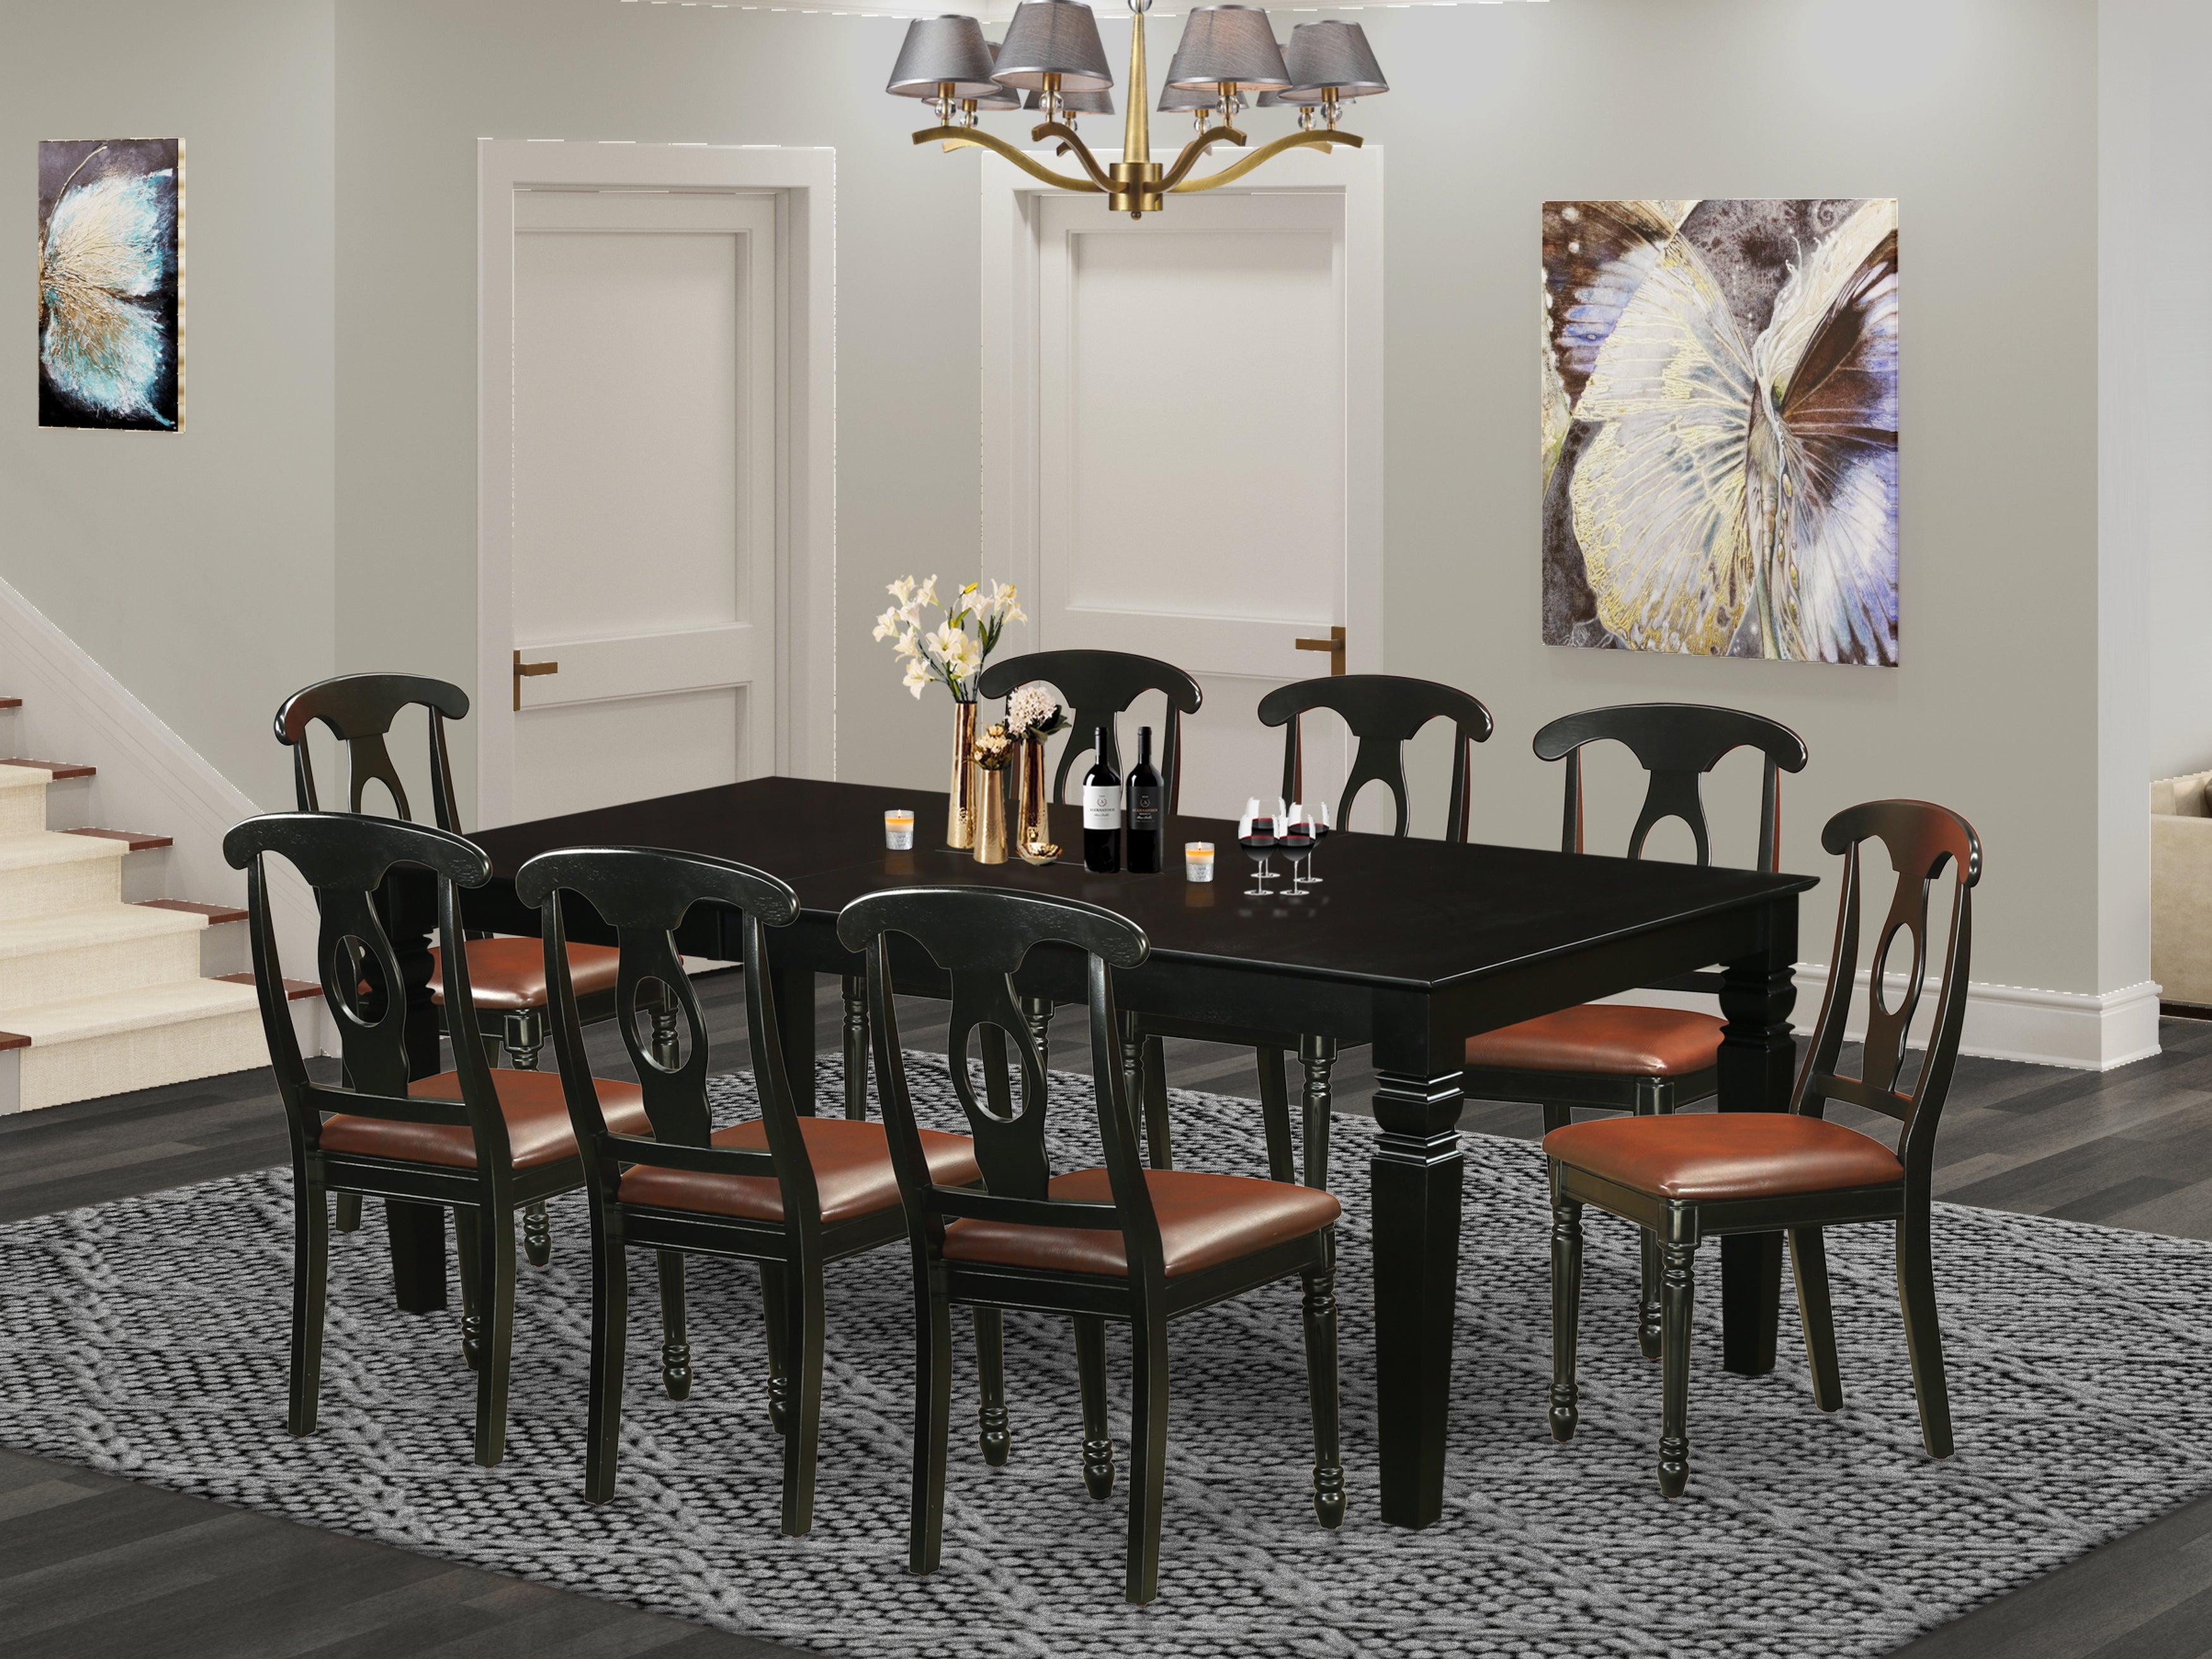 LGKE9-BLK-LC 9 Pc Dining set with a Dining Table and 8 Leather Dining Chairs in Black